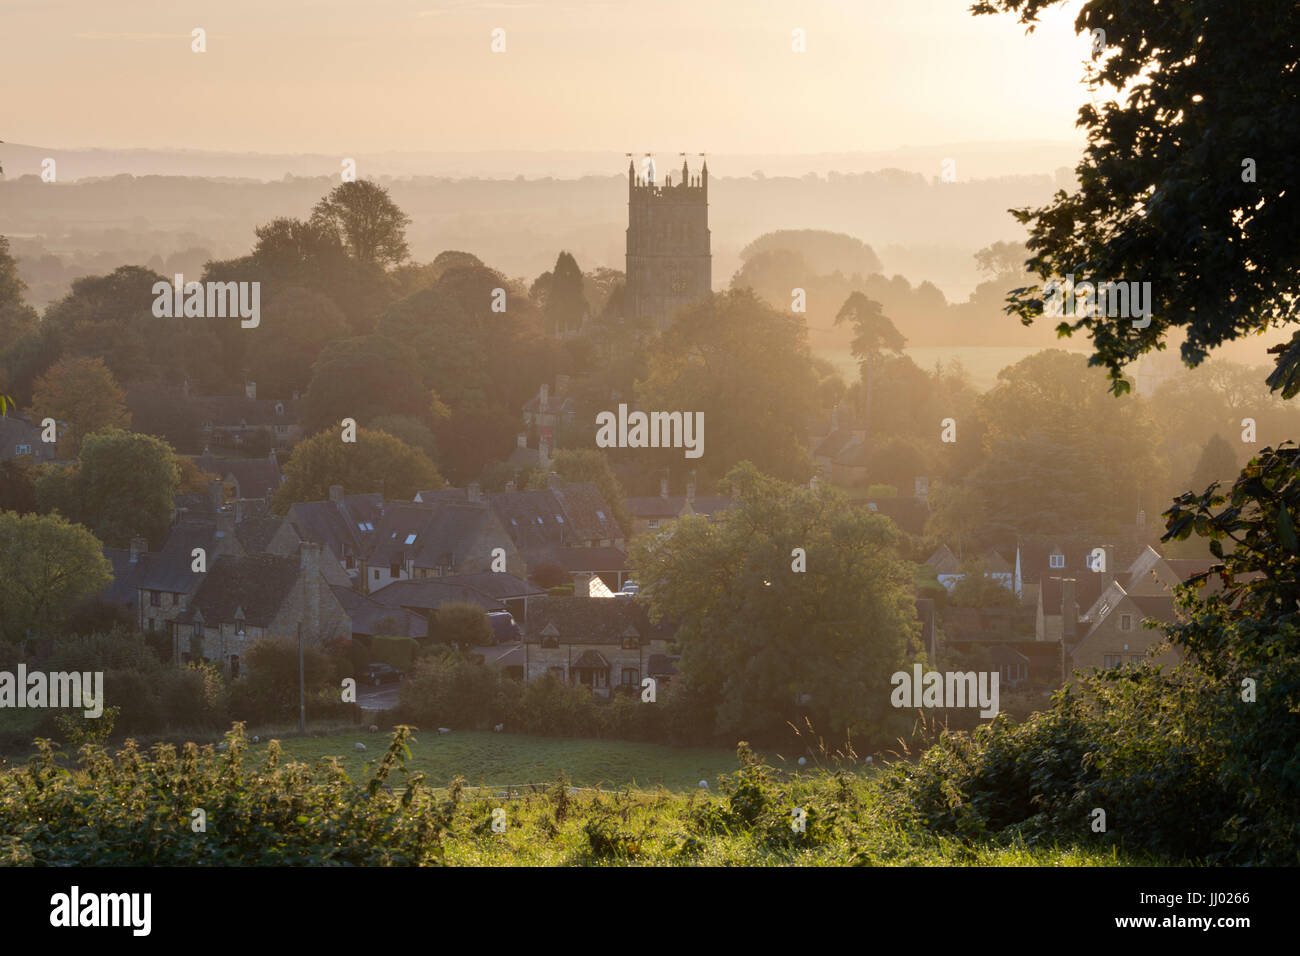 Cotswold countryside and St James Church at dawn, Chipping Campden, Cotswolds, Gloucestershire, England, United Kingdom, Europe Stock Photo